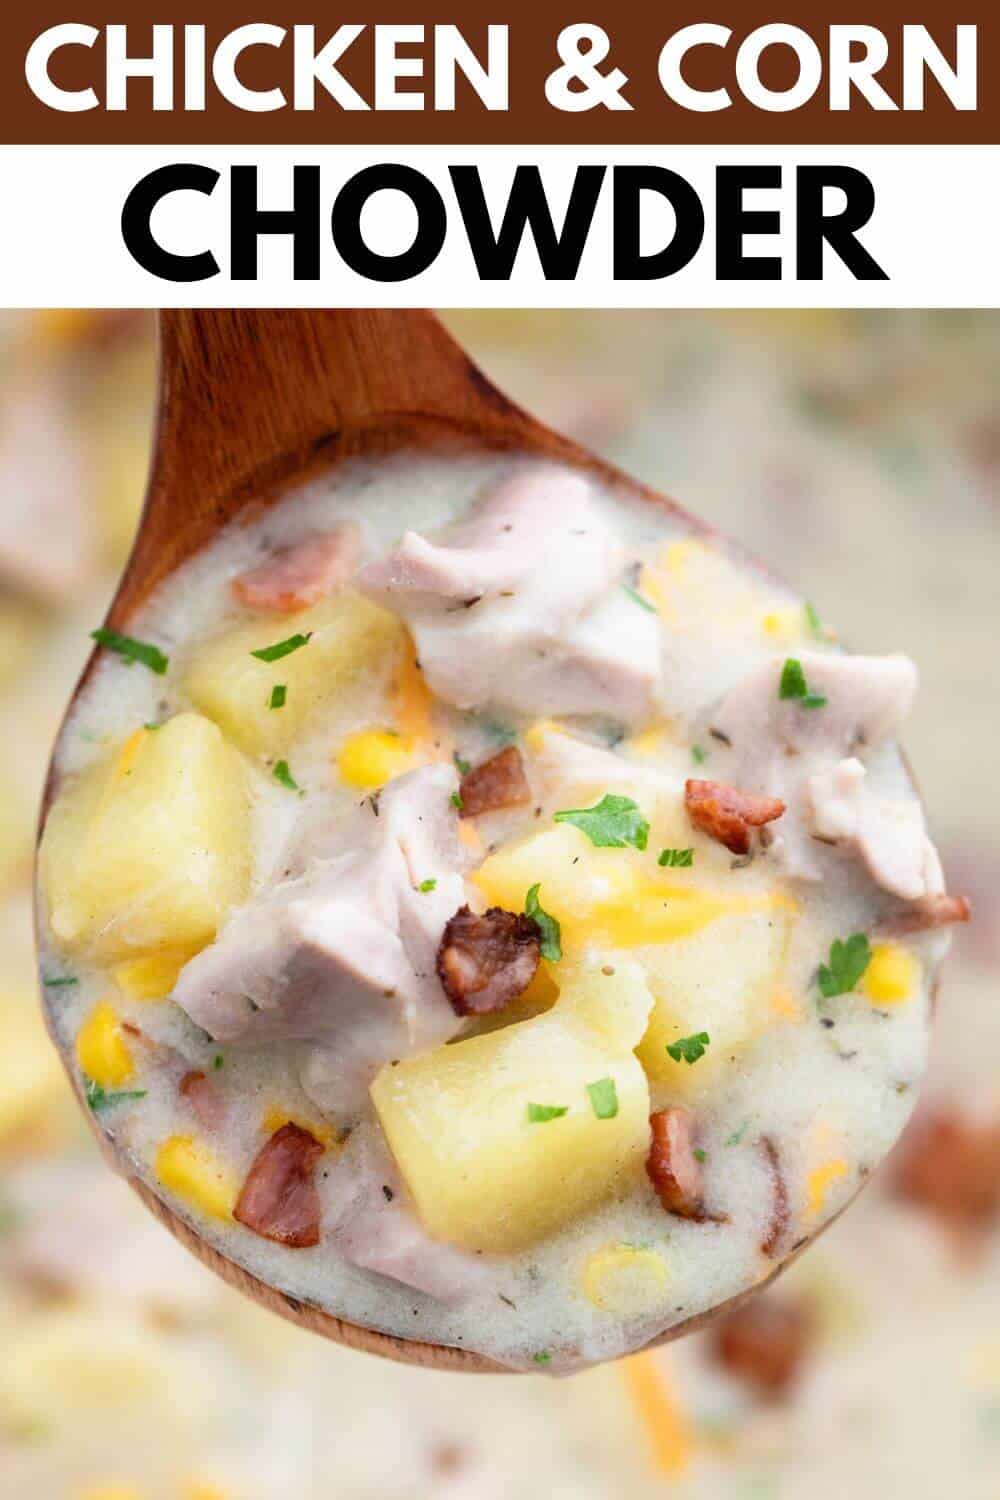 Chicken and corn chowder on a wooden spoon.